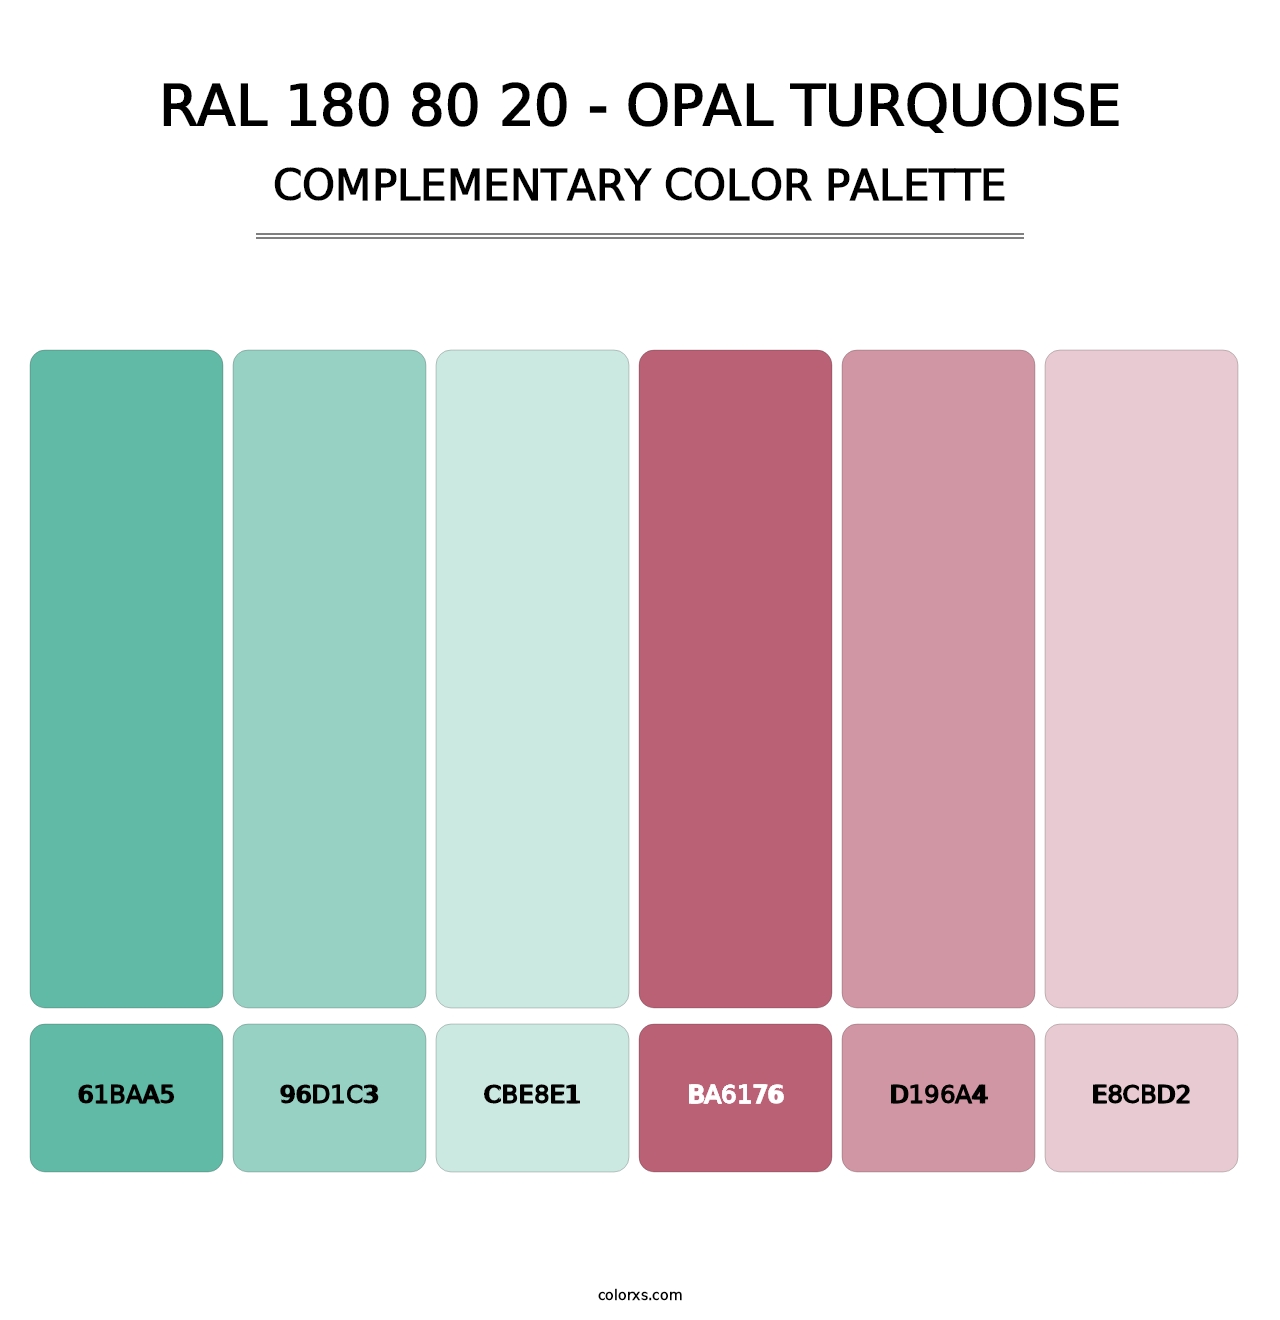 RAL 180 80 20 - Opal Turquoise - Complementary Color Palette